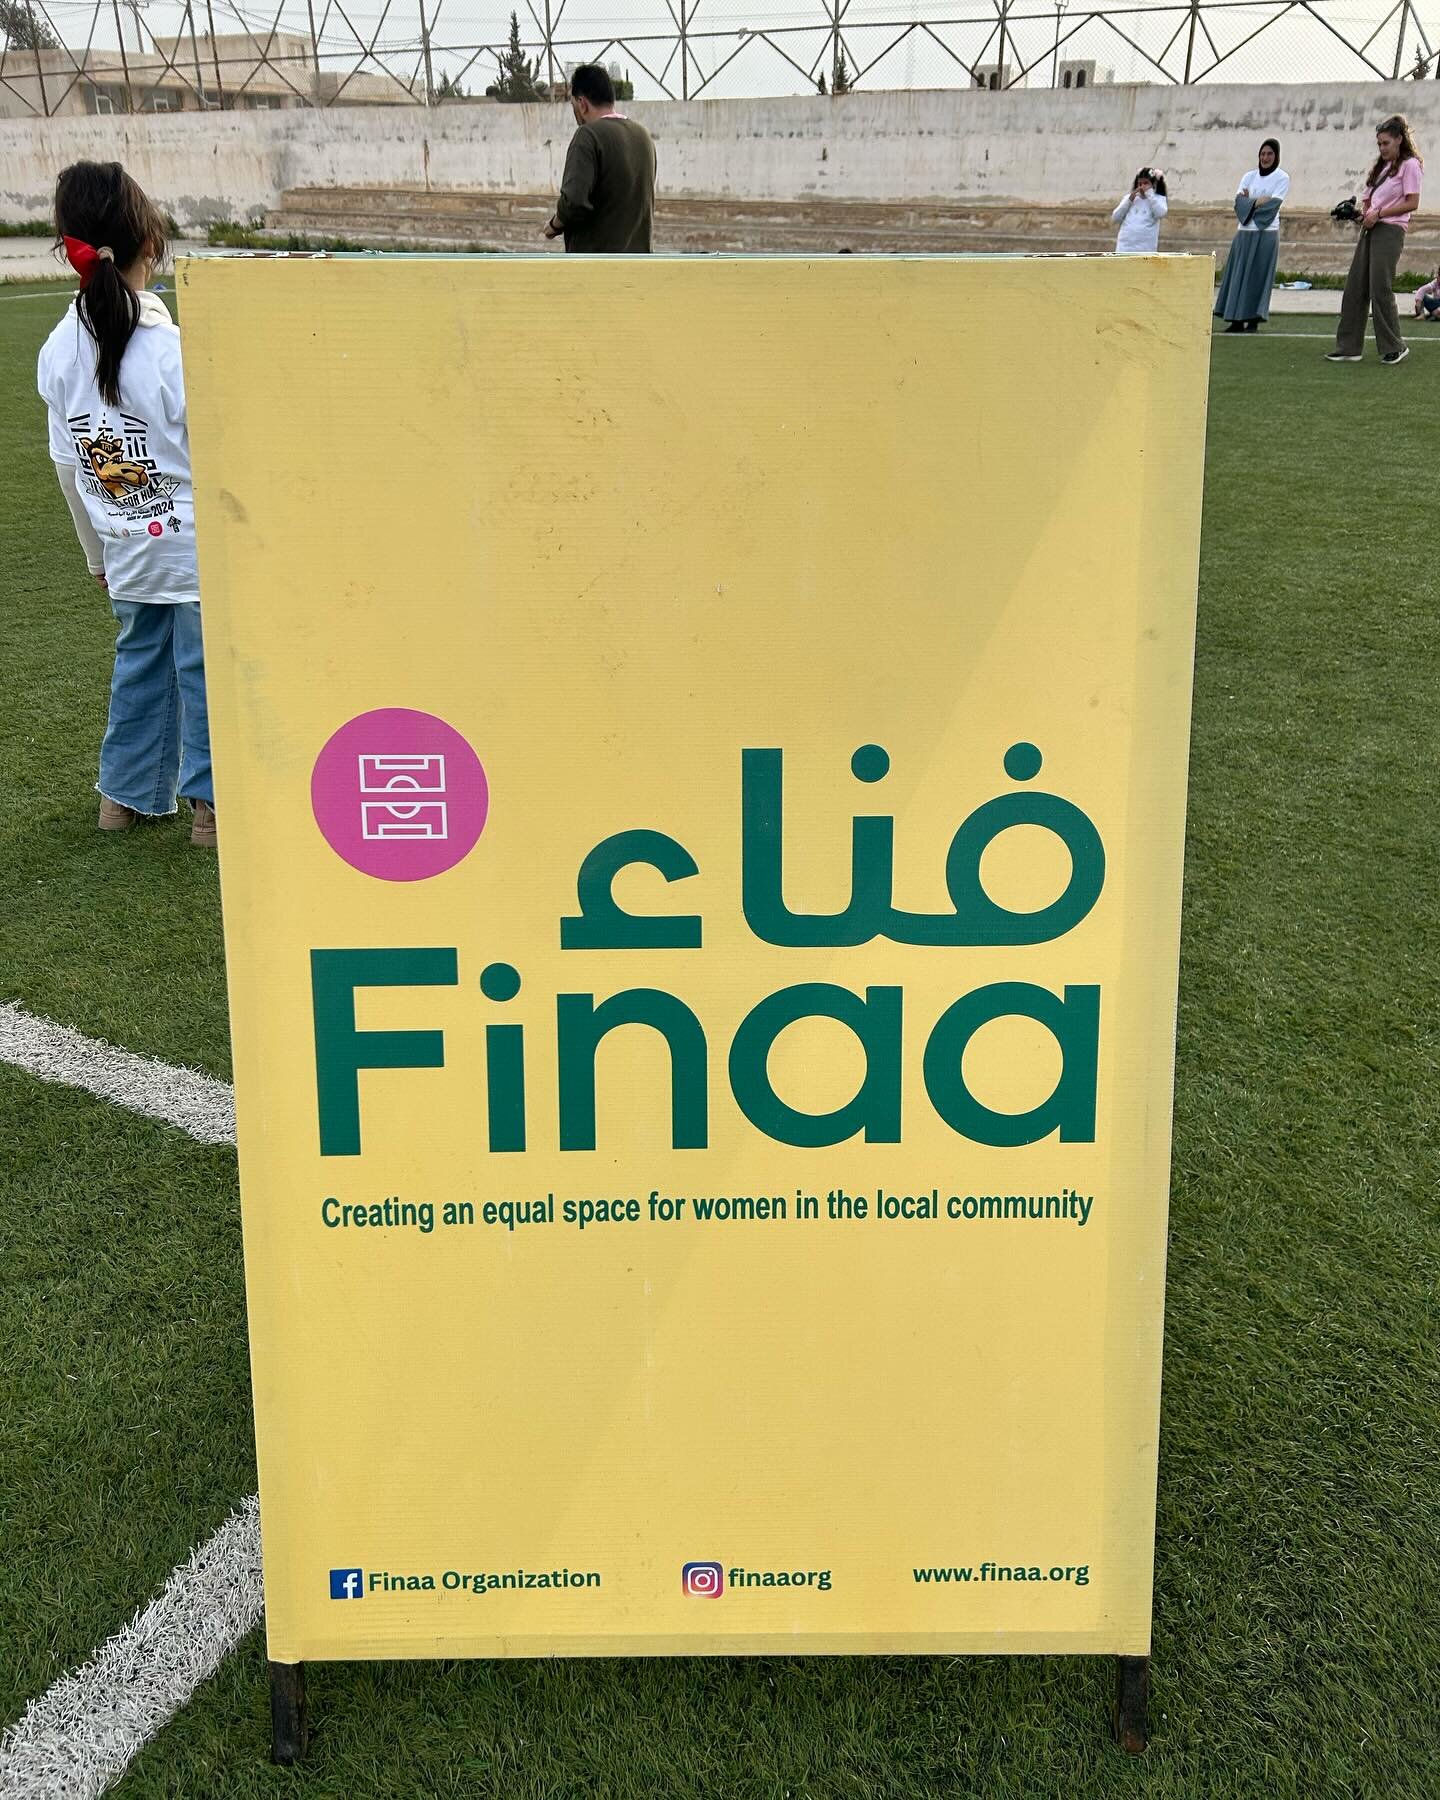 Ar Ramtha |

Today was the first day of 2 planned football clinics this week in Jordan. Together with @finaaorg we hosted 70+ girls. We played games, danced Zumba, laughed, and shared an Iftar meal together. We are excited for the future, and the pow